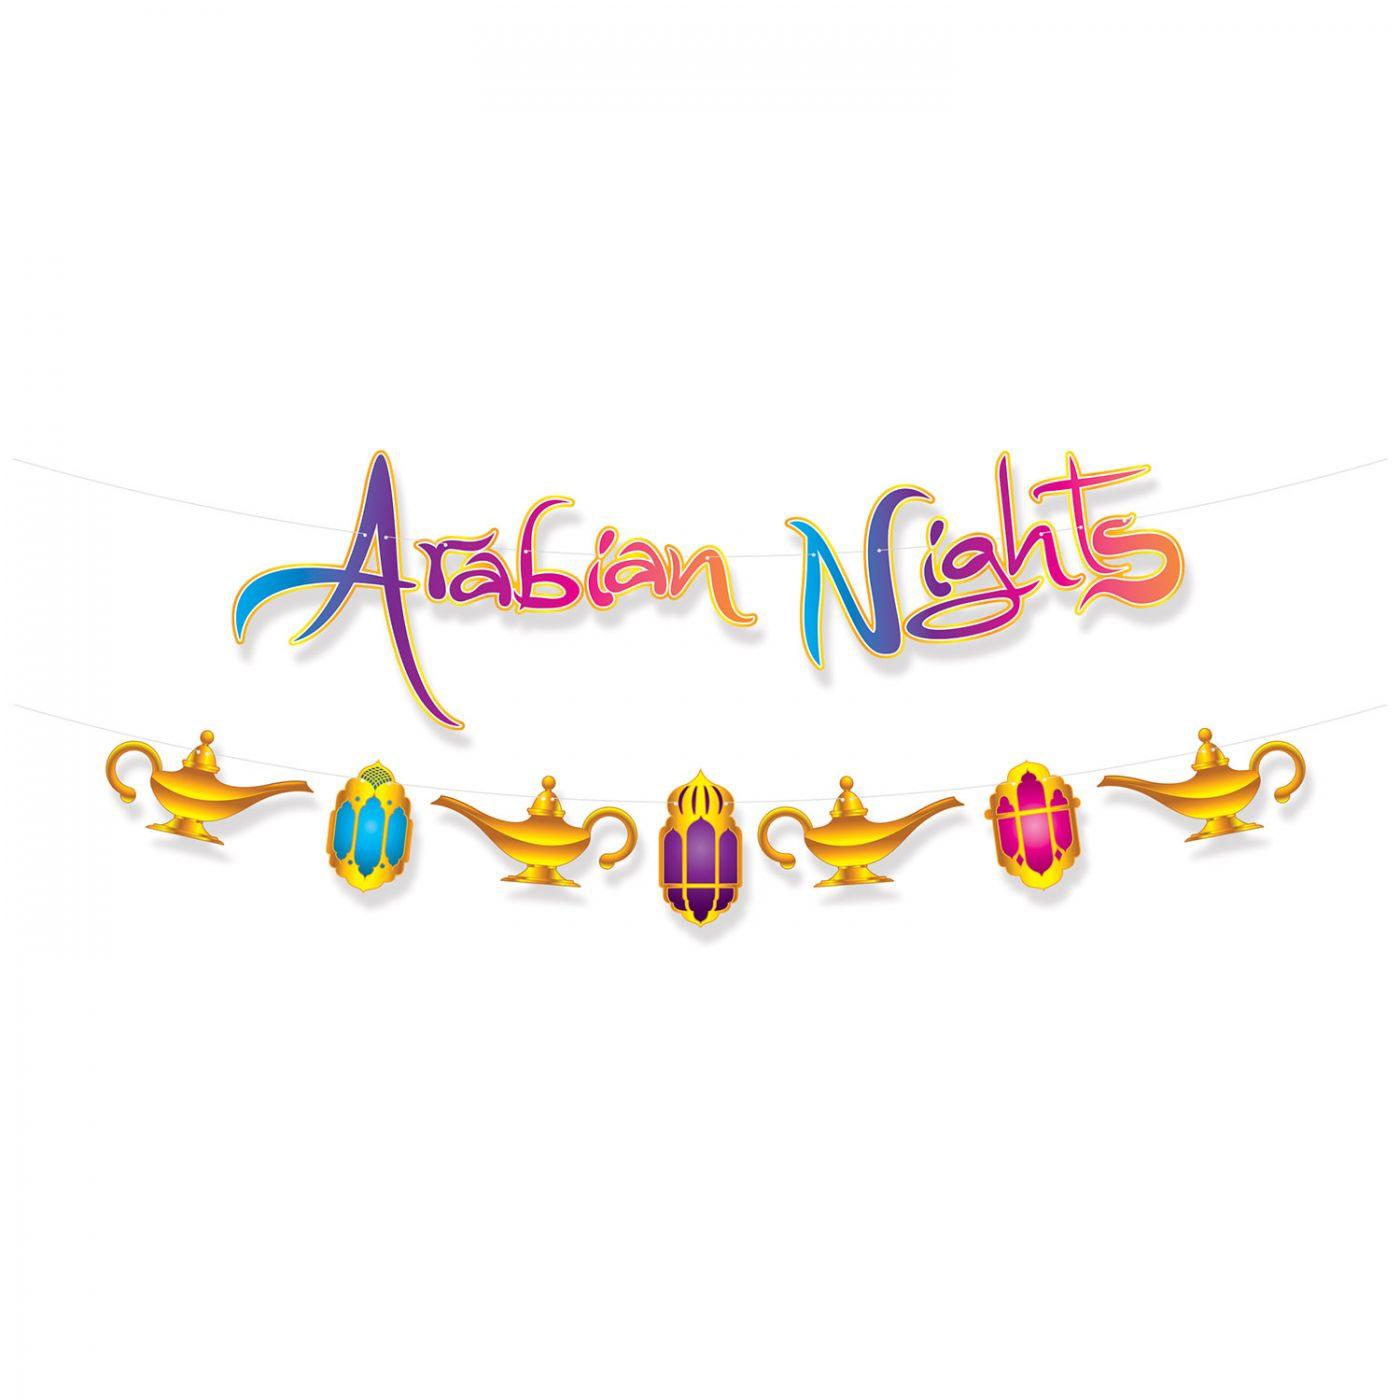 Arabian Nights Streamer or Banner Set by Beistle 53582 available in the UK here at Karnival Costumes online party shop